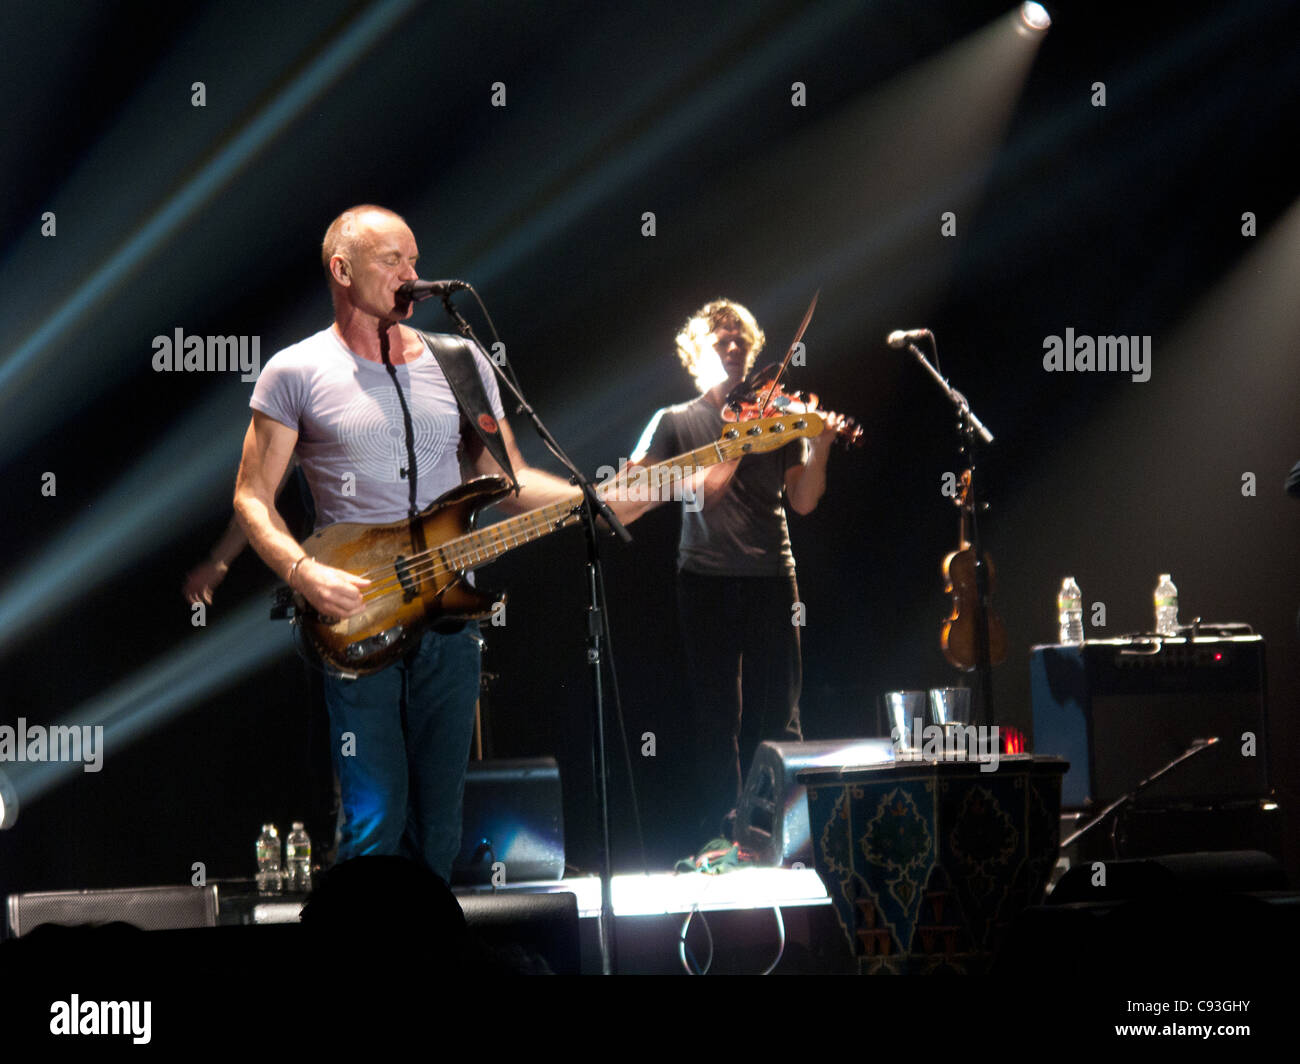 Sting in concert, in NYC's Roseland theater, 11-8-11. photography by Tom Zuback Stock Photo